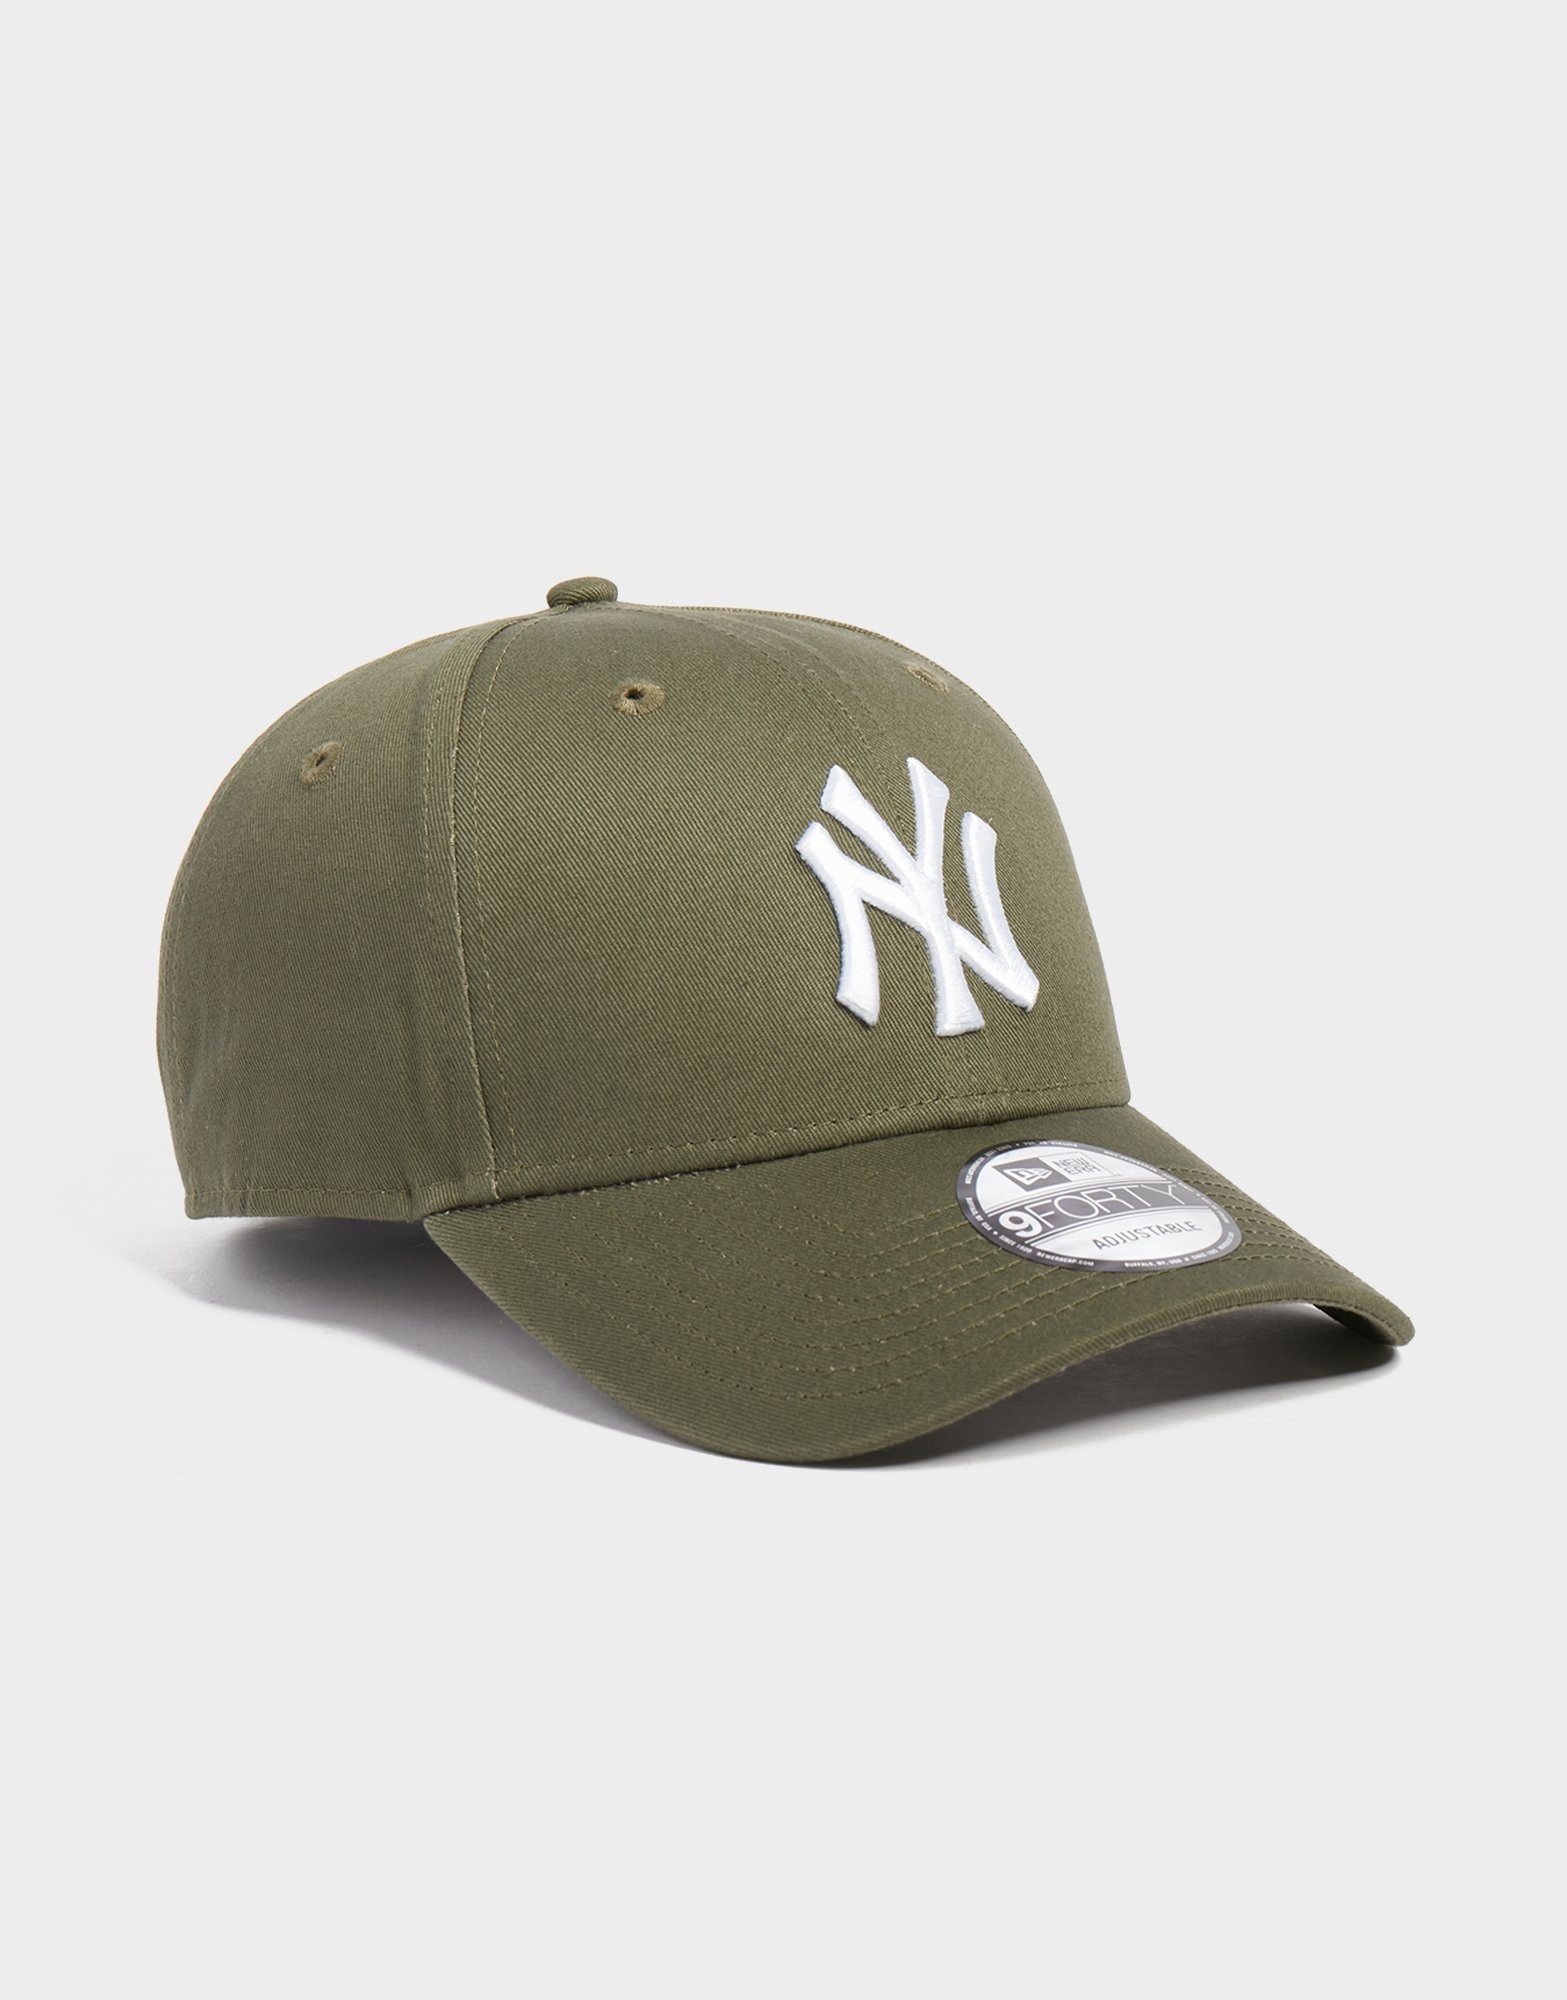 WOMEN FASHION Accessories Hat and cap Green discount 65% Zara hat and cap Green Single 